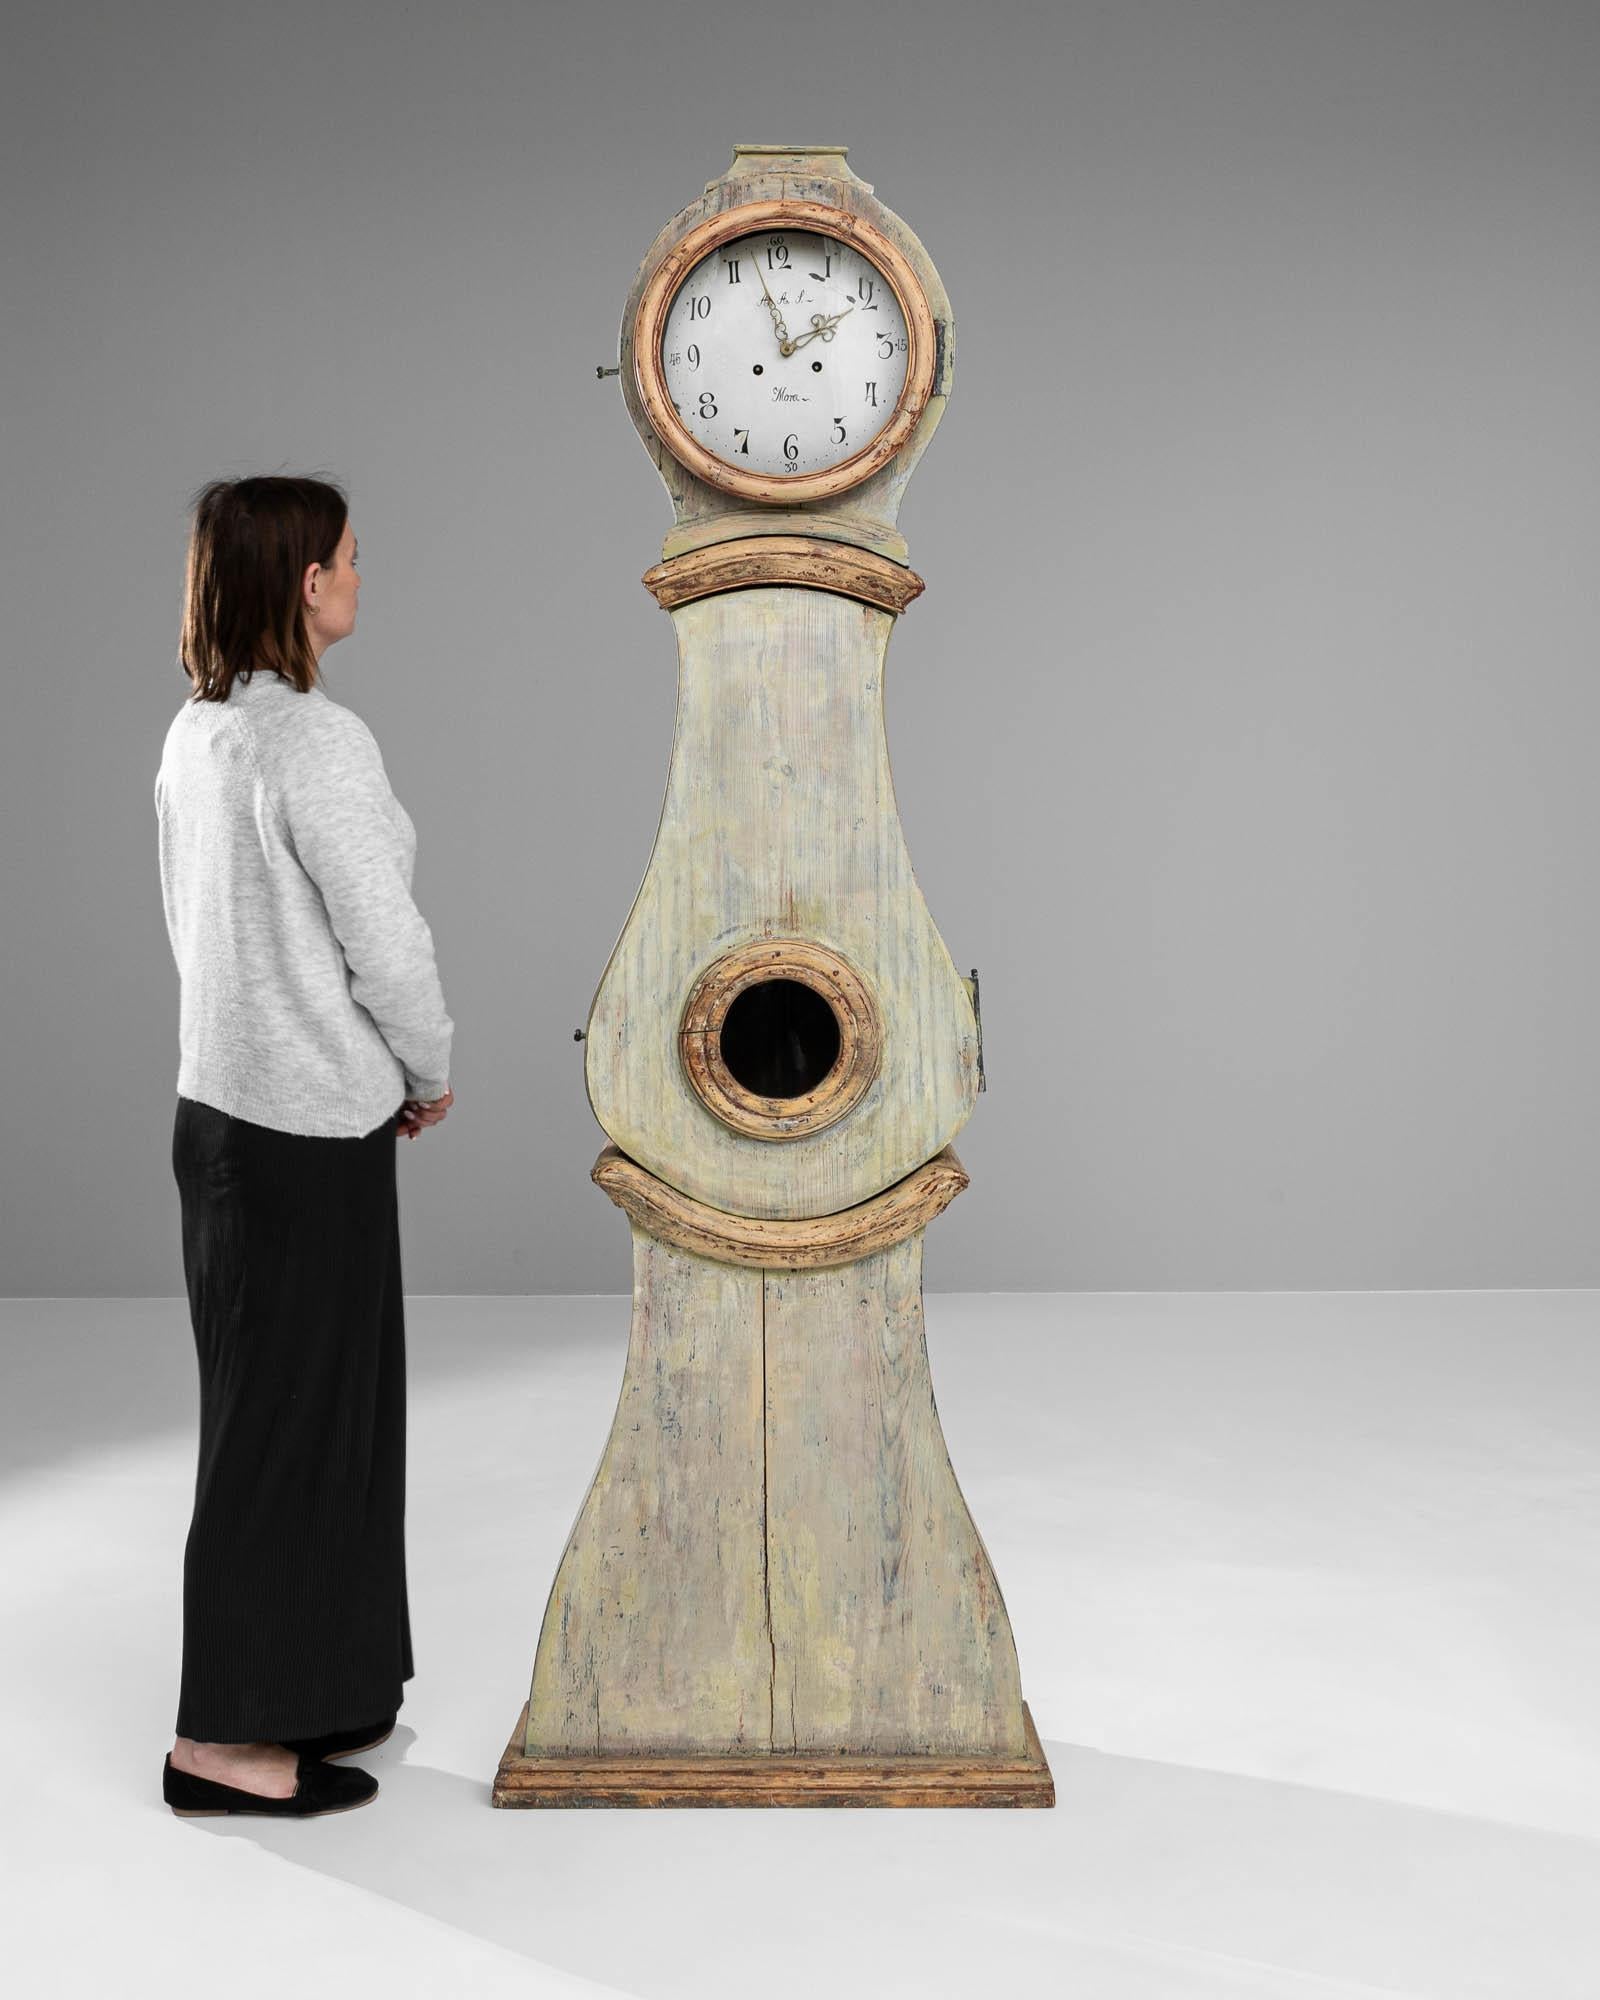 This early 19th Century Swedish wooden floor clock stands as a towering testament to the enduring elegance of Scandinavian design. Its tall, slender body is shaped from wood that bears the gentle patina of time, its surface graced with the faded